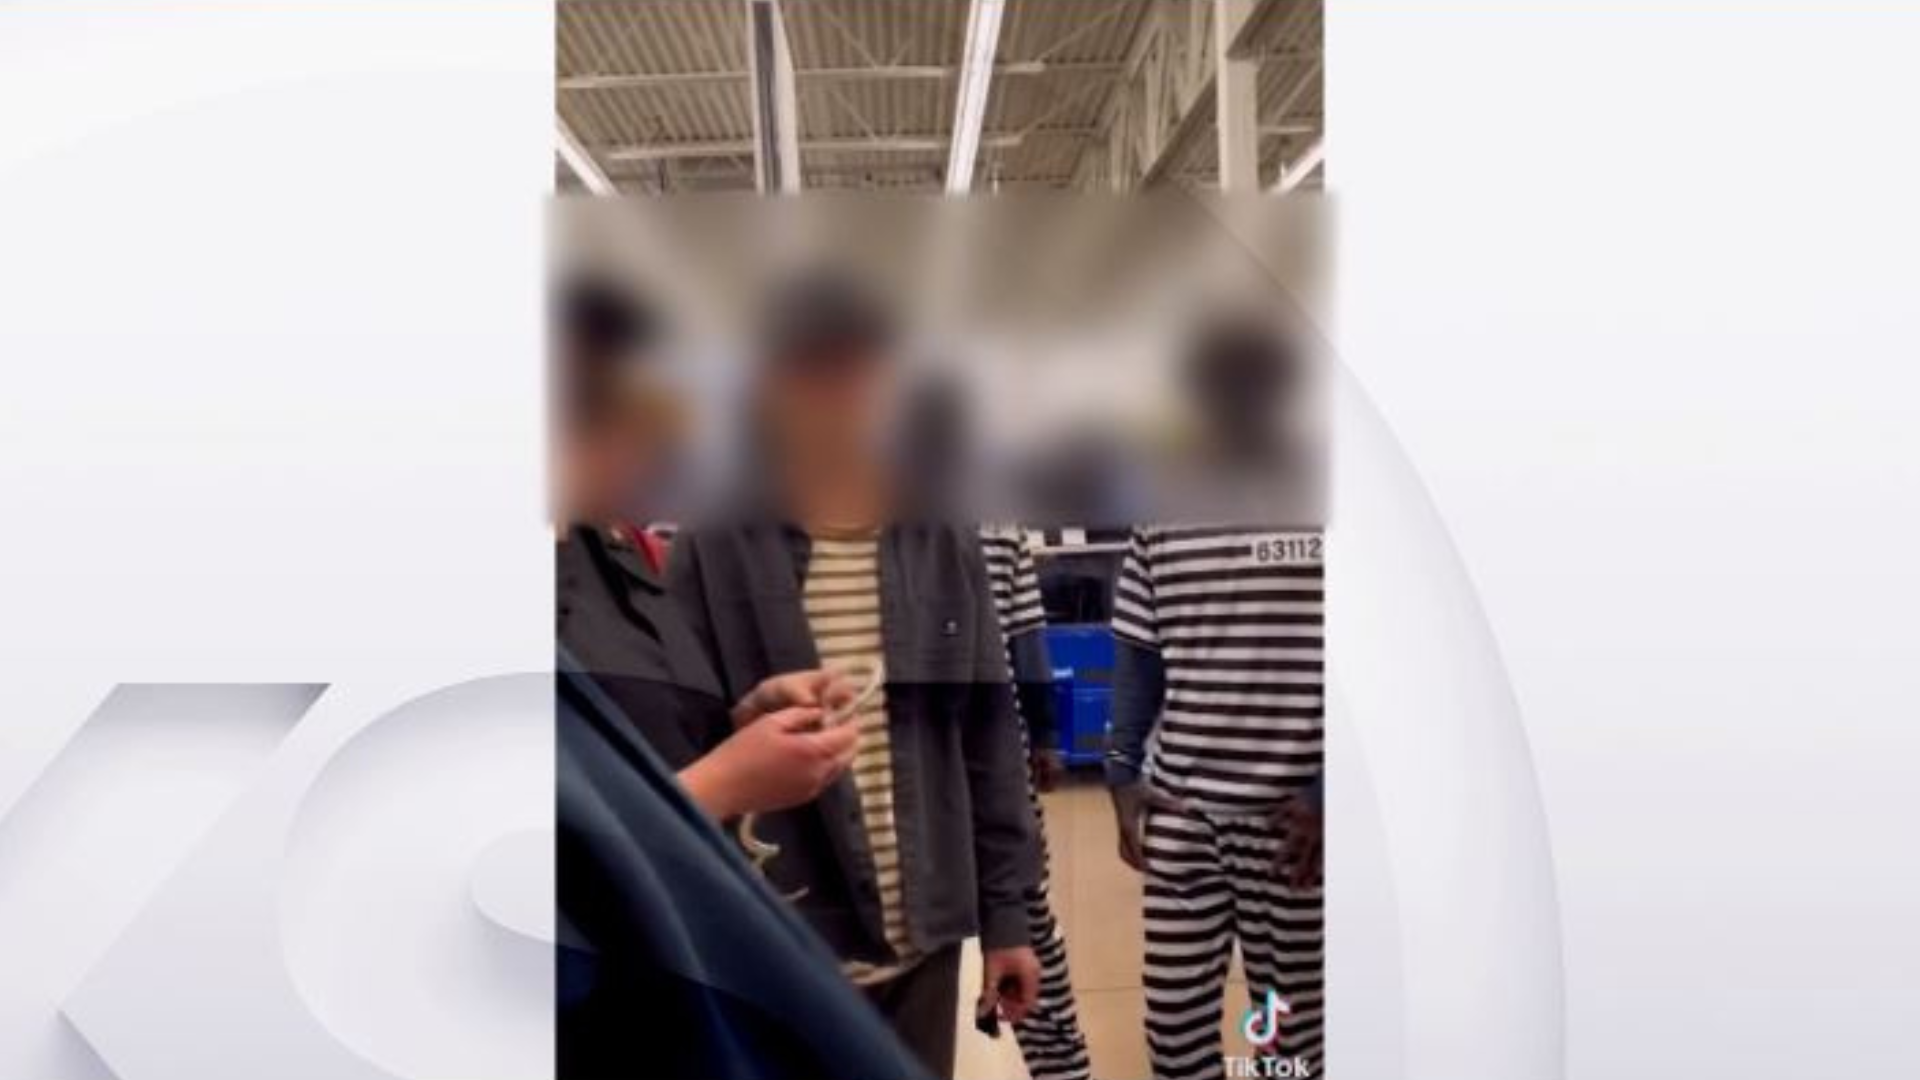 Screen shot taken from a video that shows three young people dressed in blackface and prison outfit...